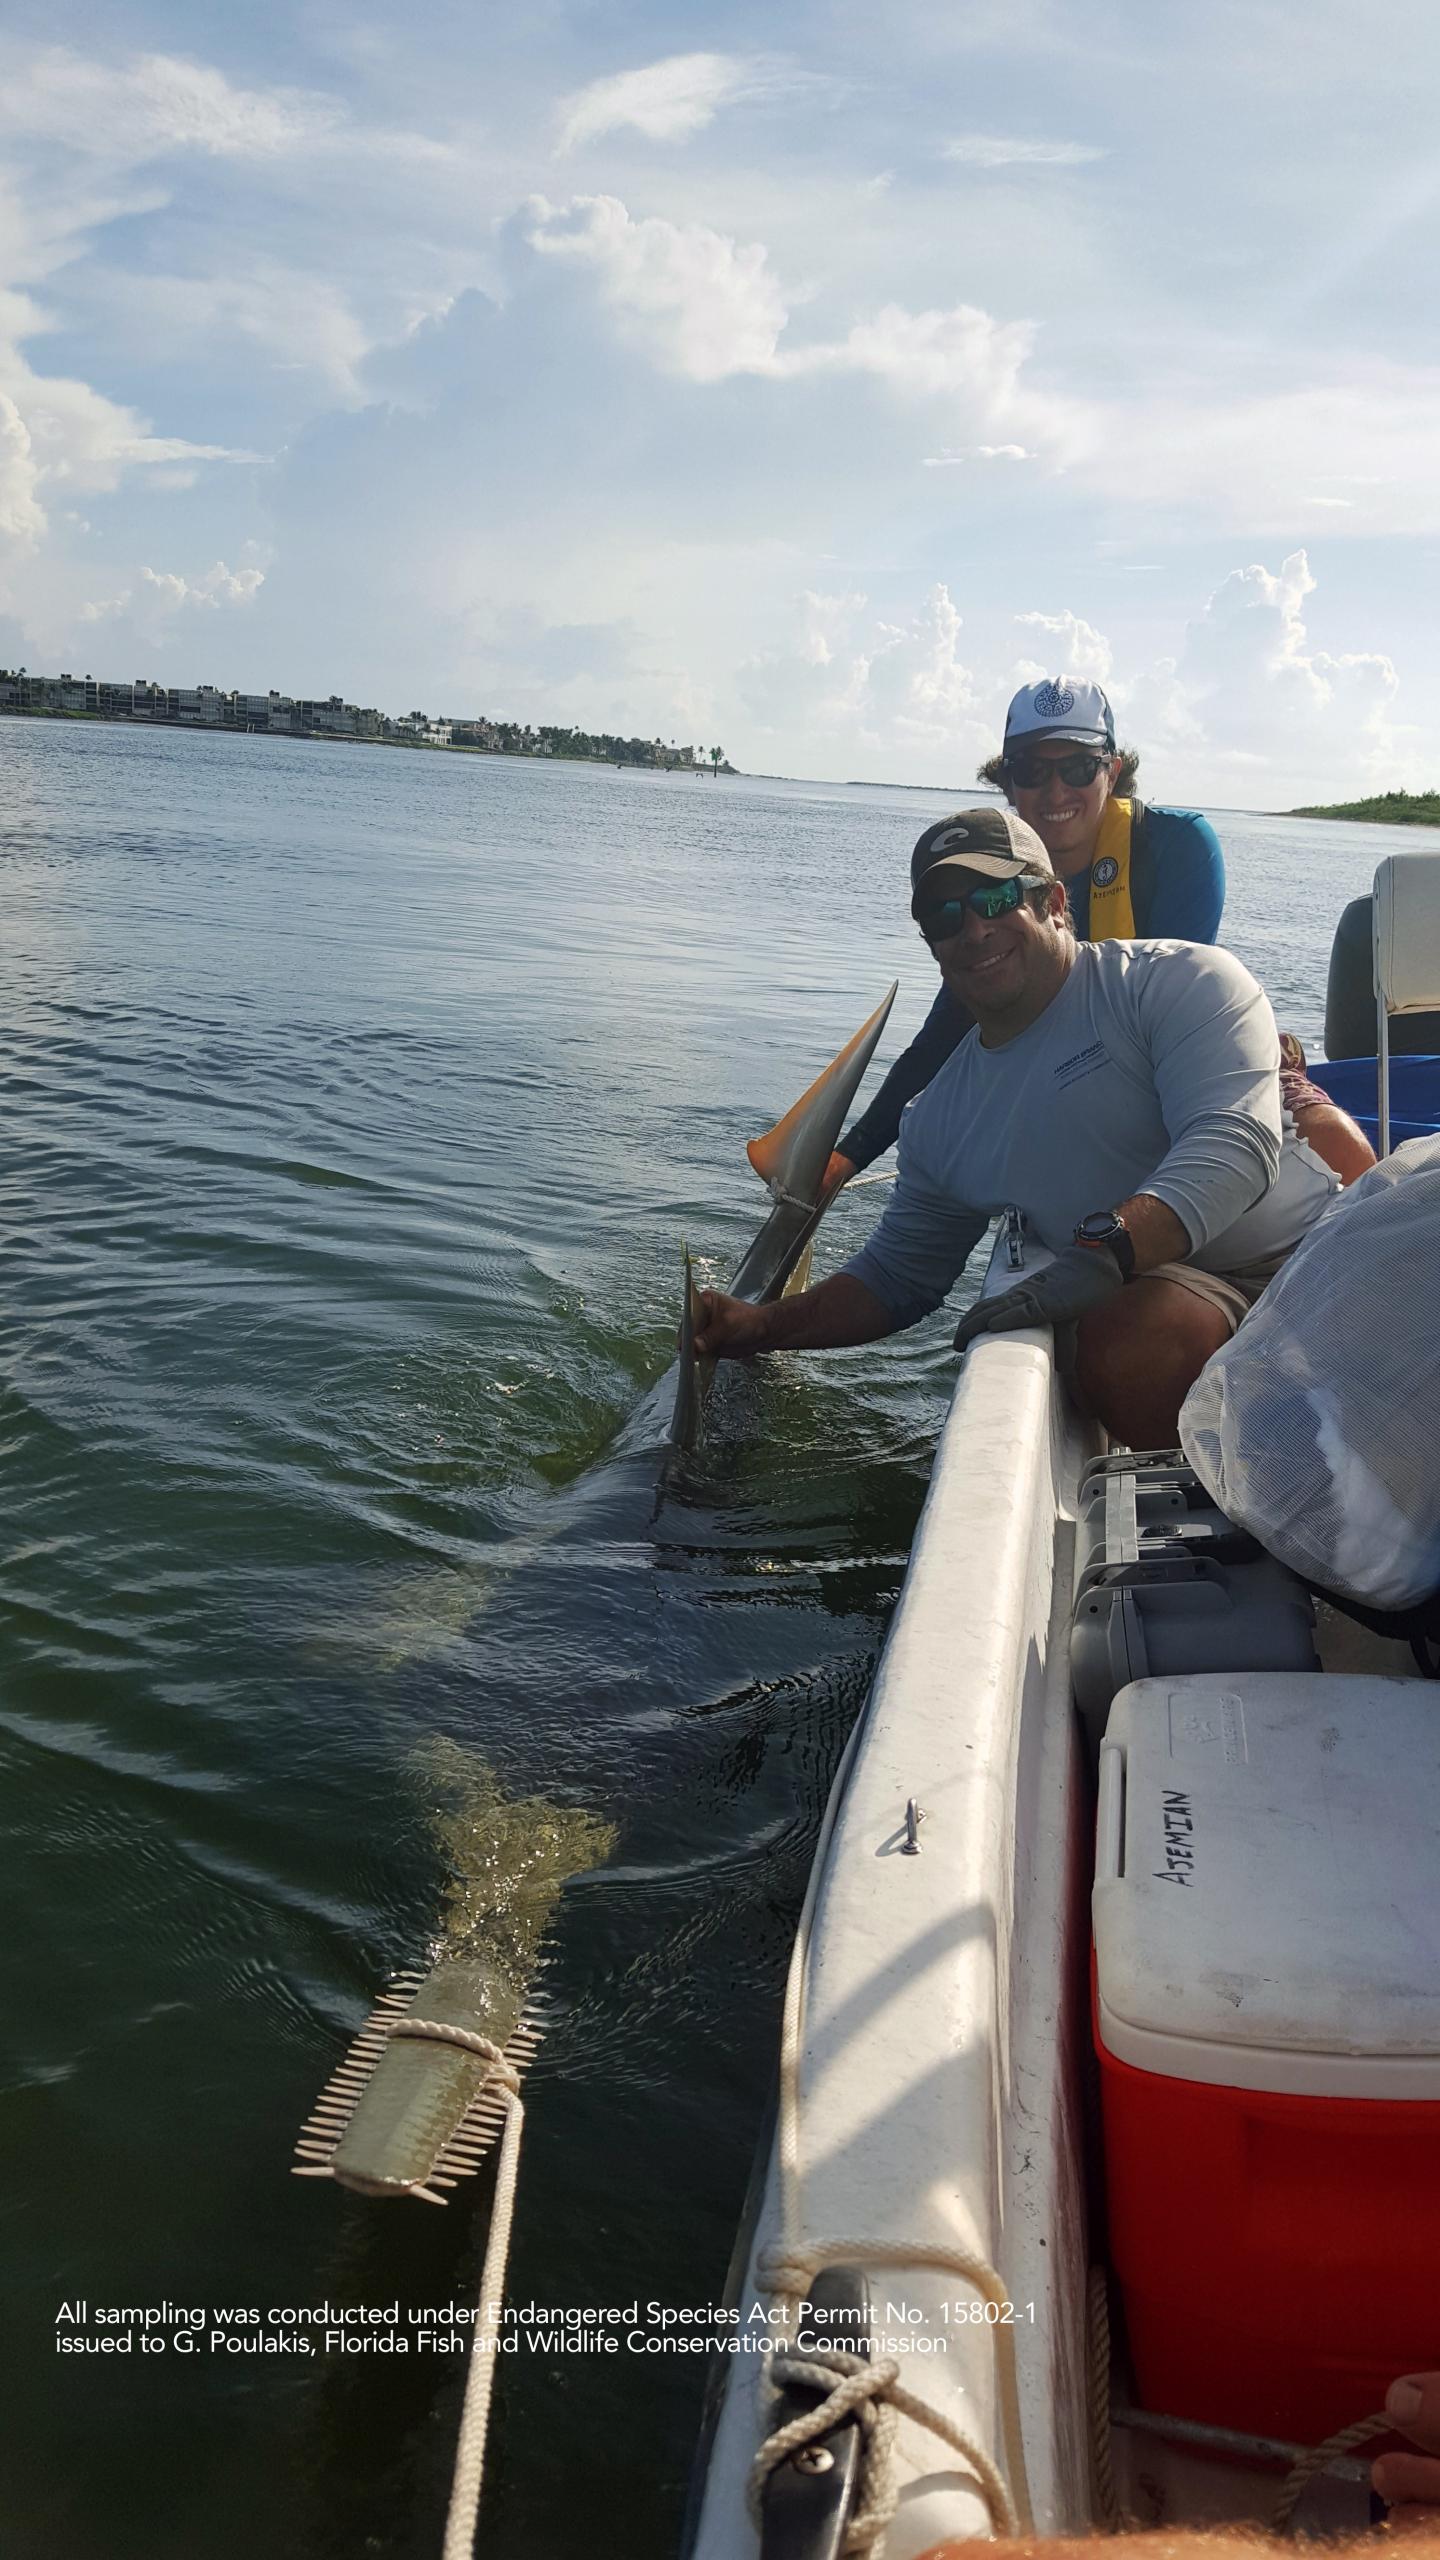 Elasmobranch Community in Southern Indian River Lagoon